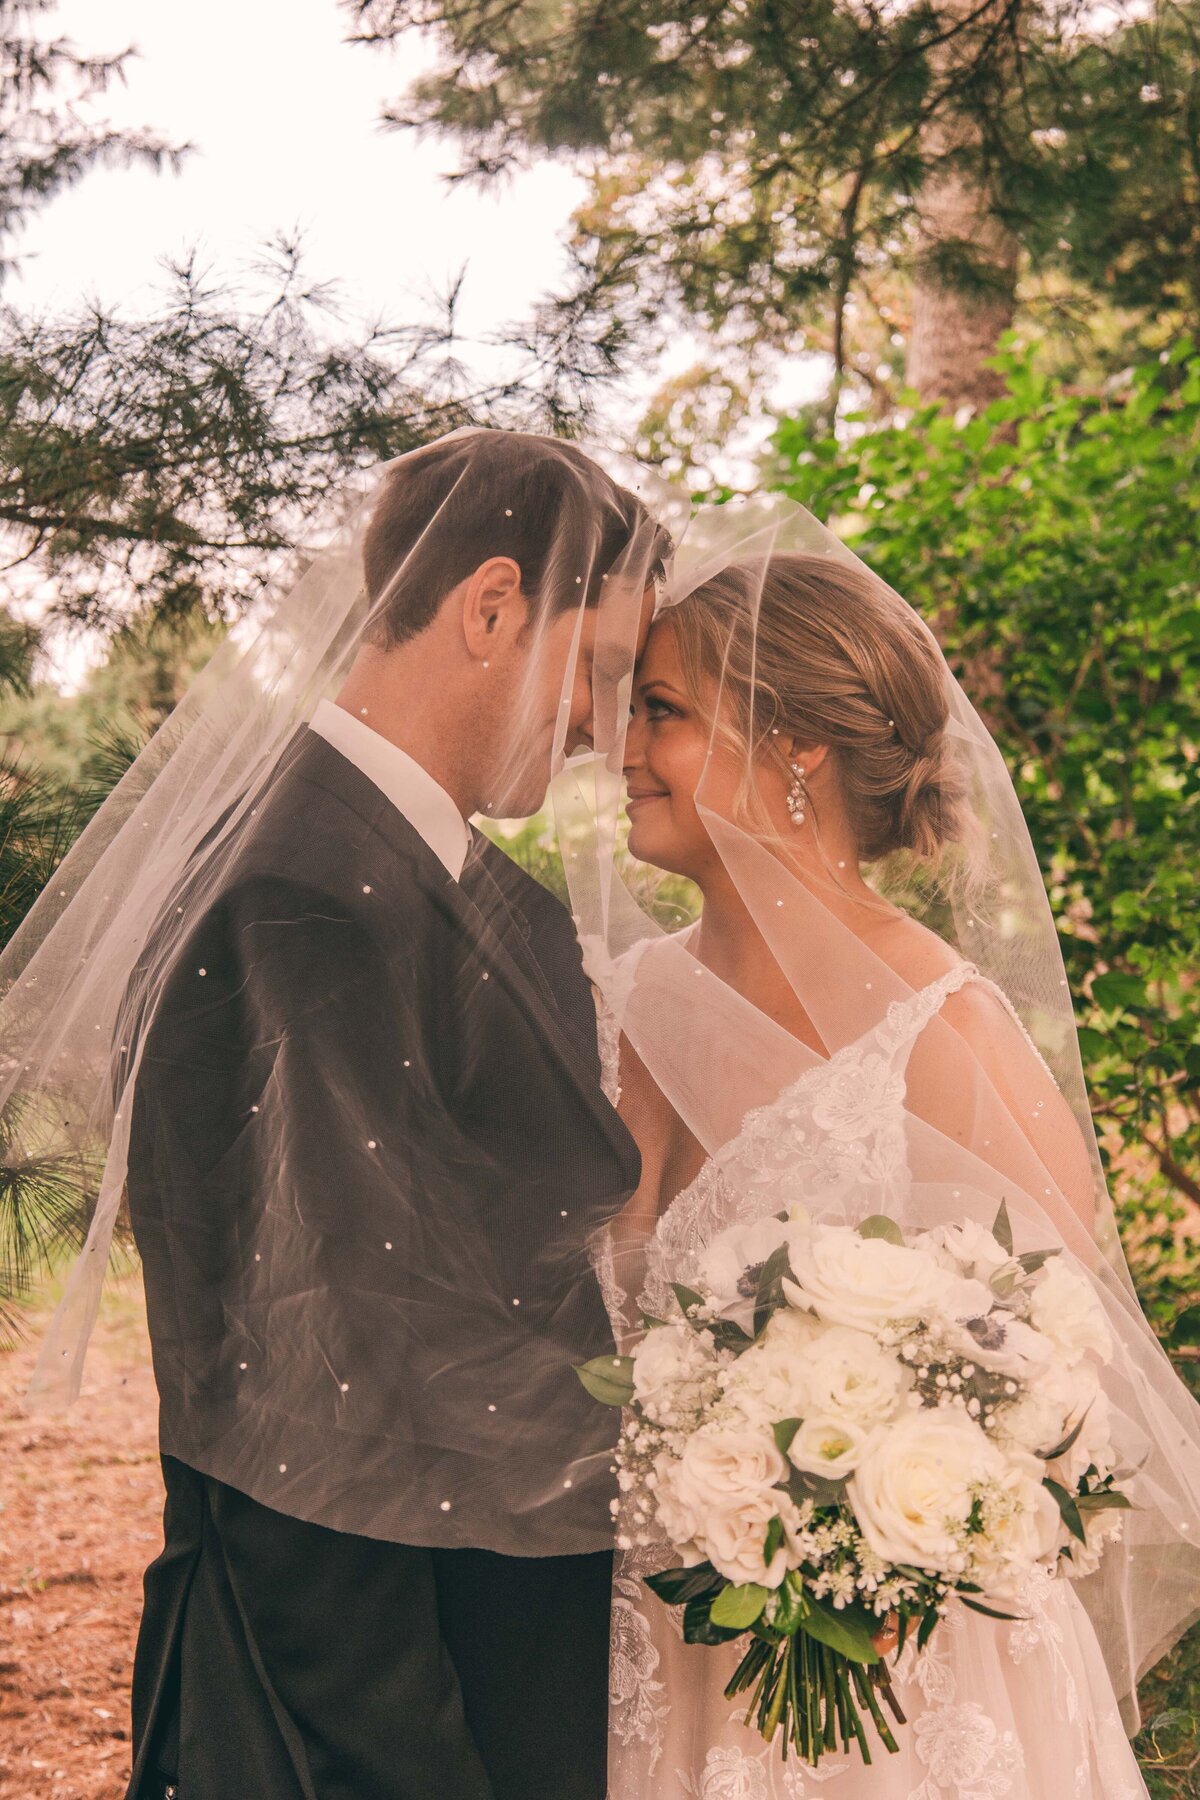 A bride and groom standing close under a veil in a wooded area at Park Farm Winery, the bride holding a bouquet of white flowers, both smiling gently at each other.